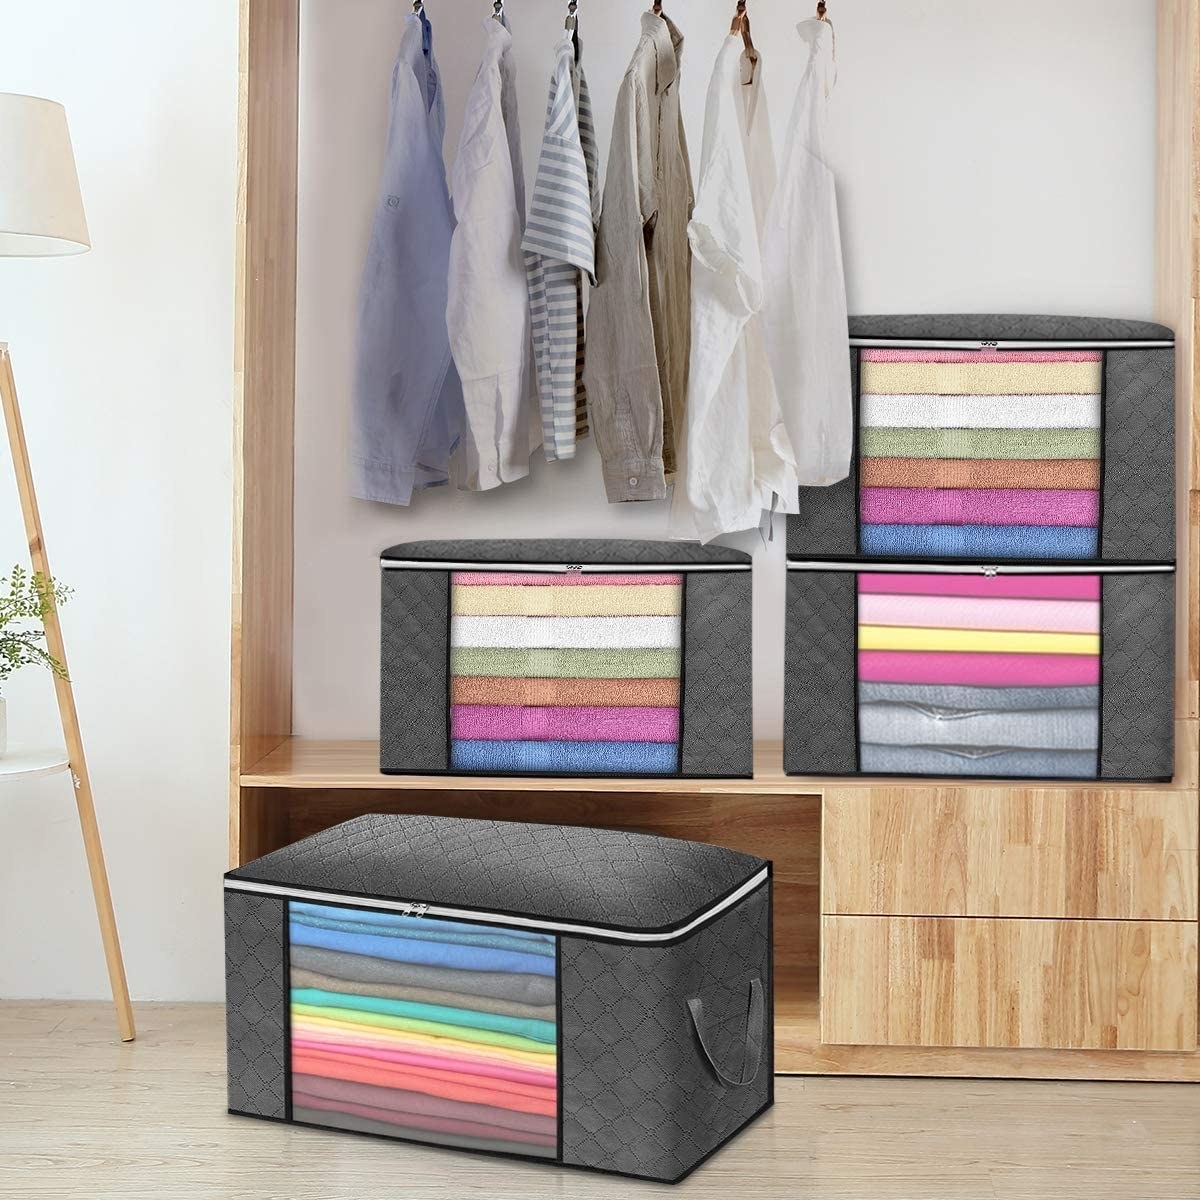 Four large storage cubes with various items inside